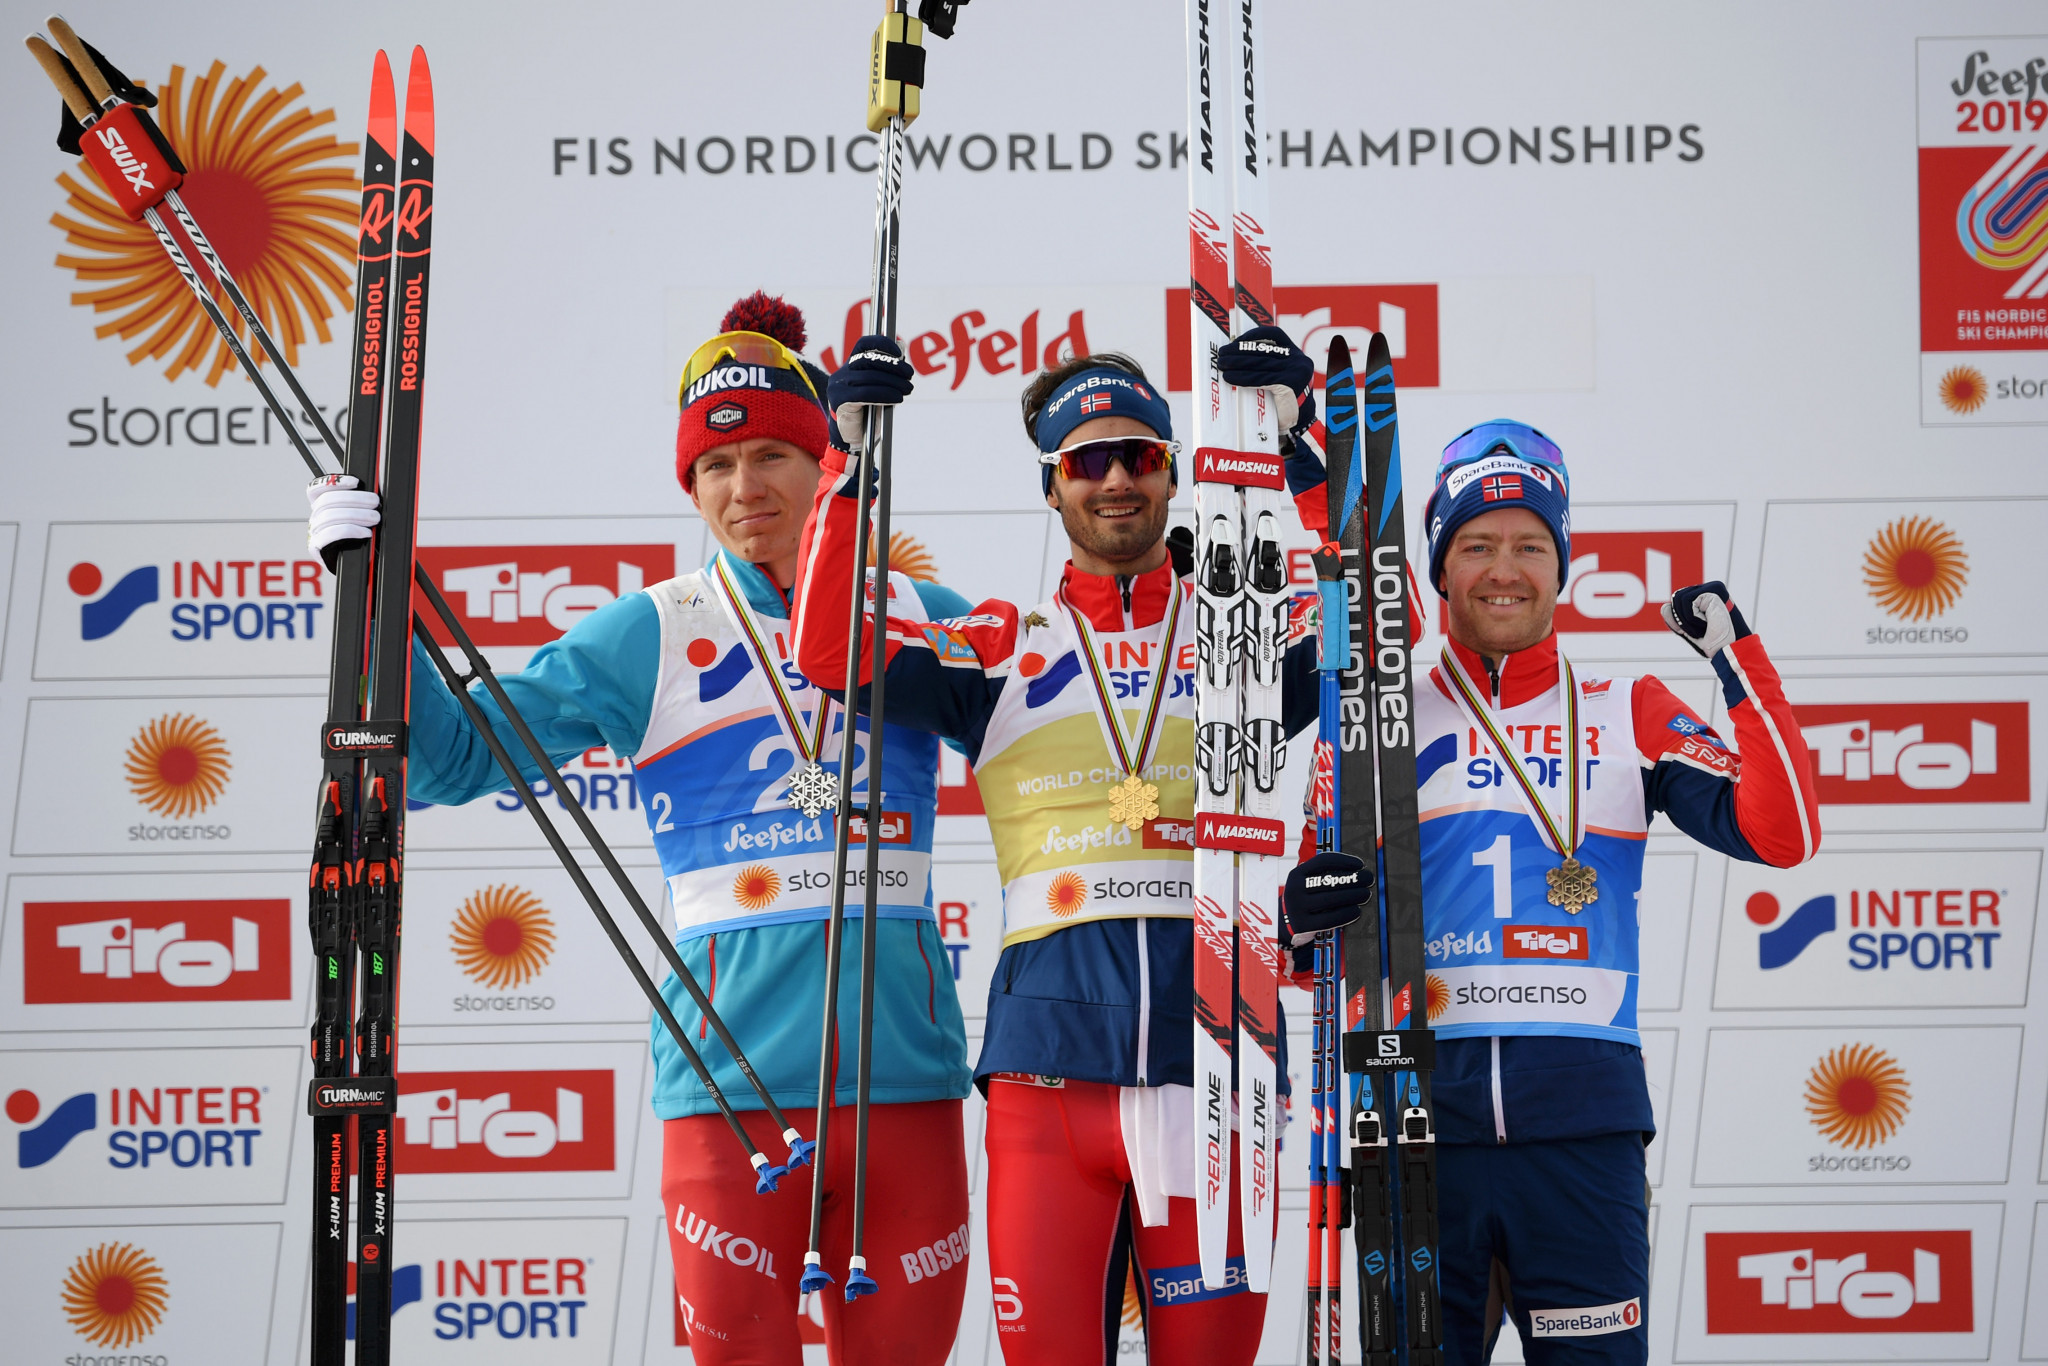 The Norwegian overcame a strong field to secure his first world title ©Getty Images